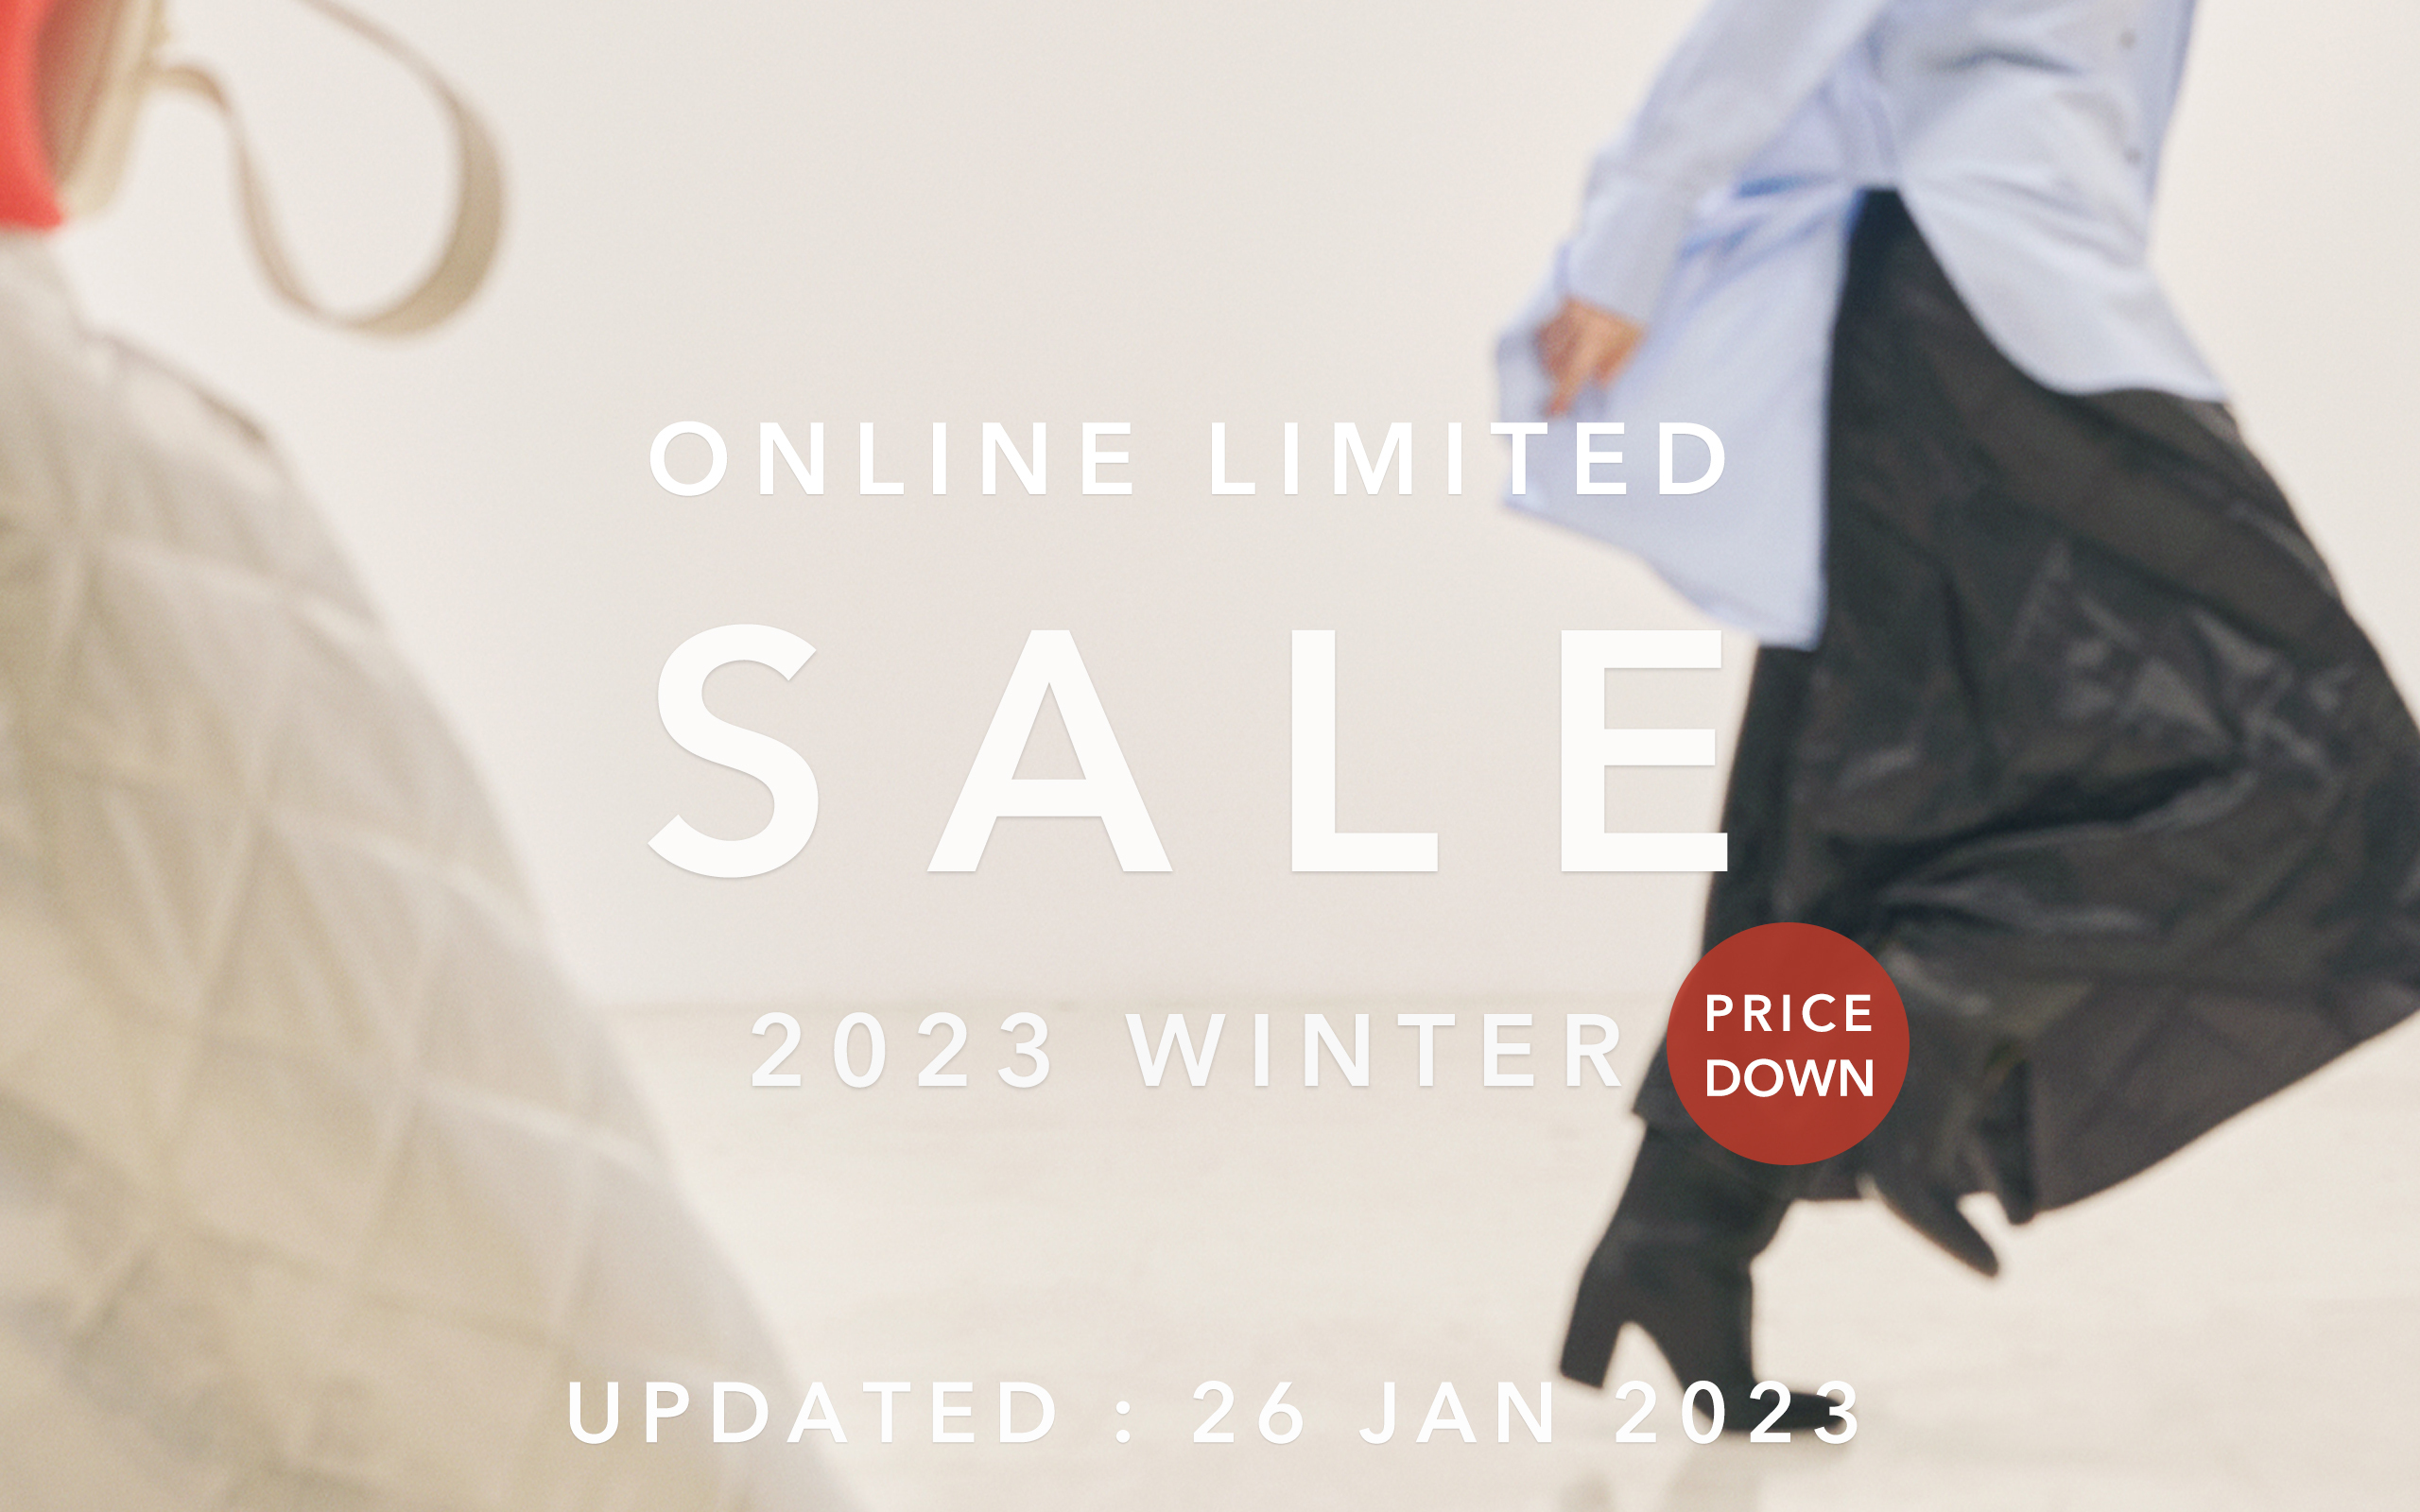 ONLINE LIMITED SALE 2023 WINTER PRICEDOWN